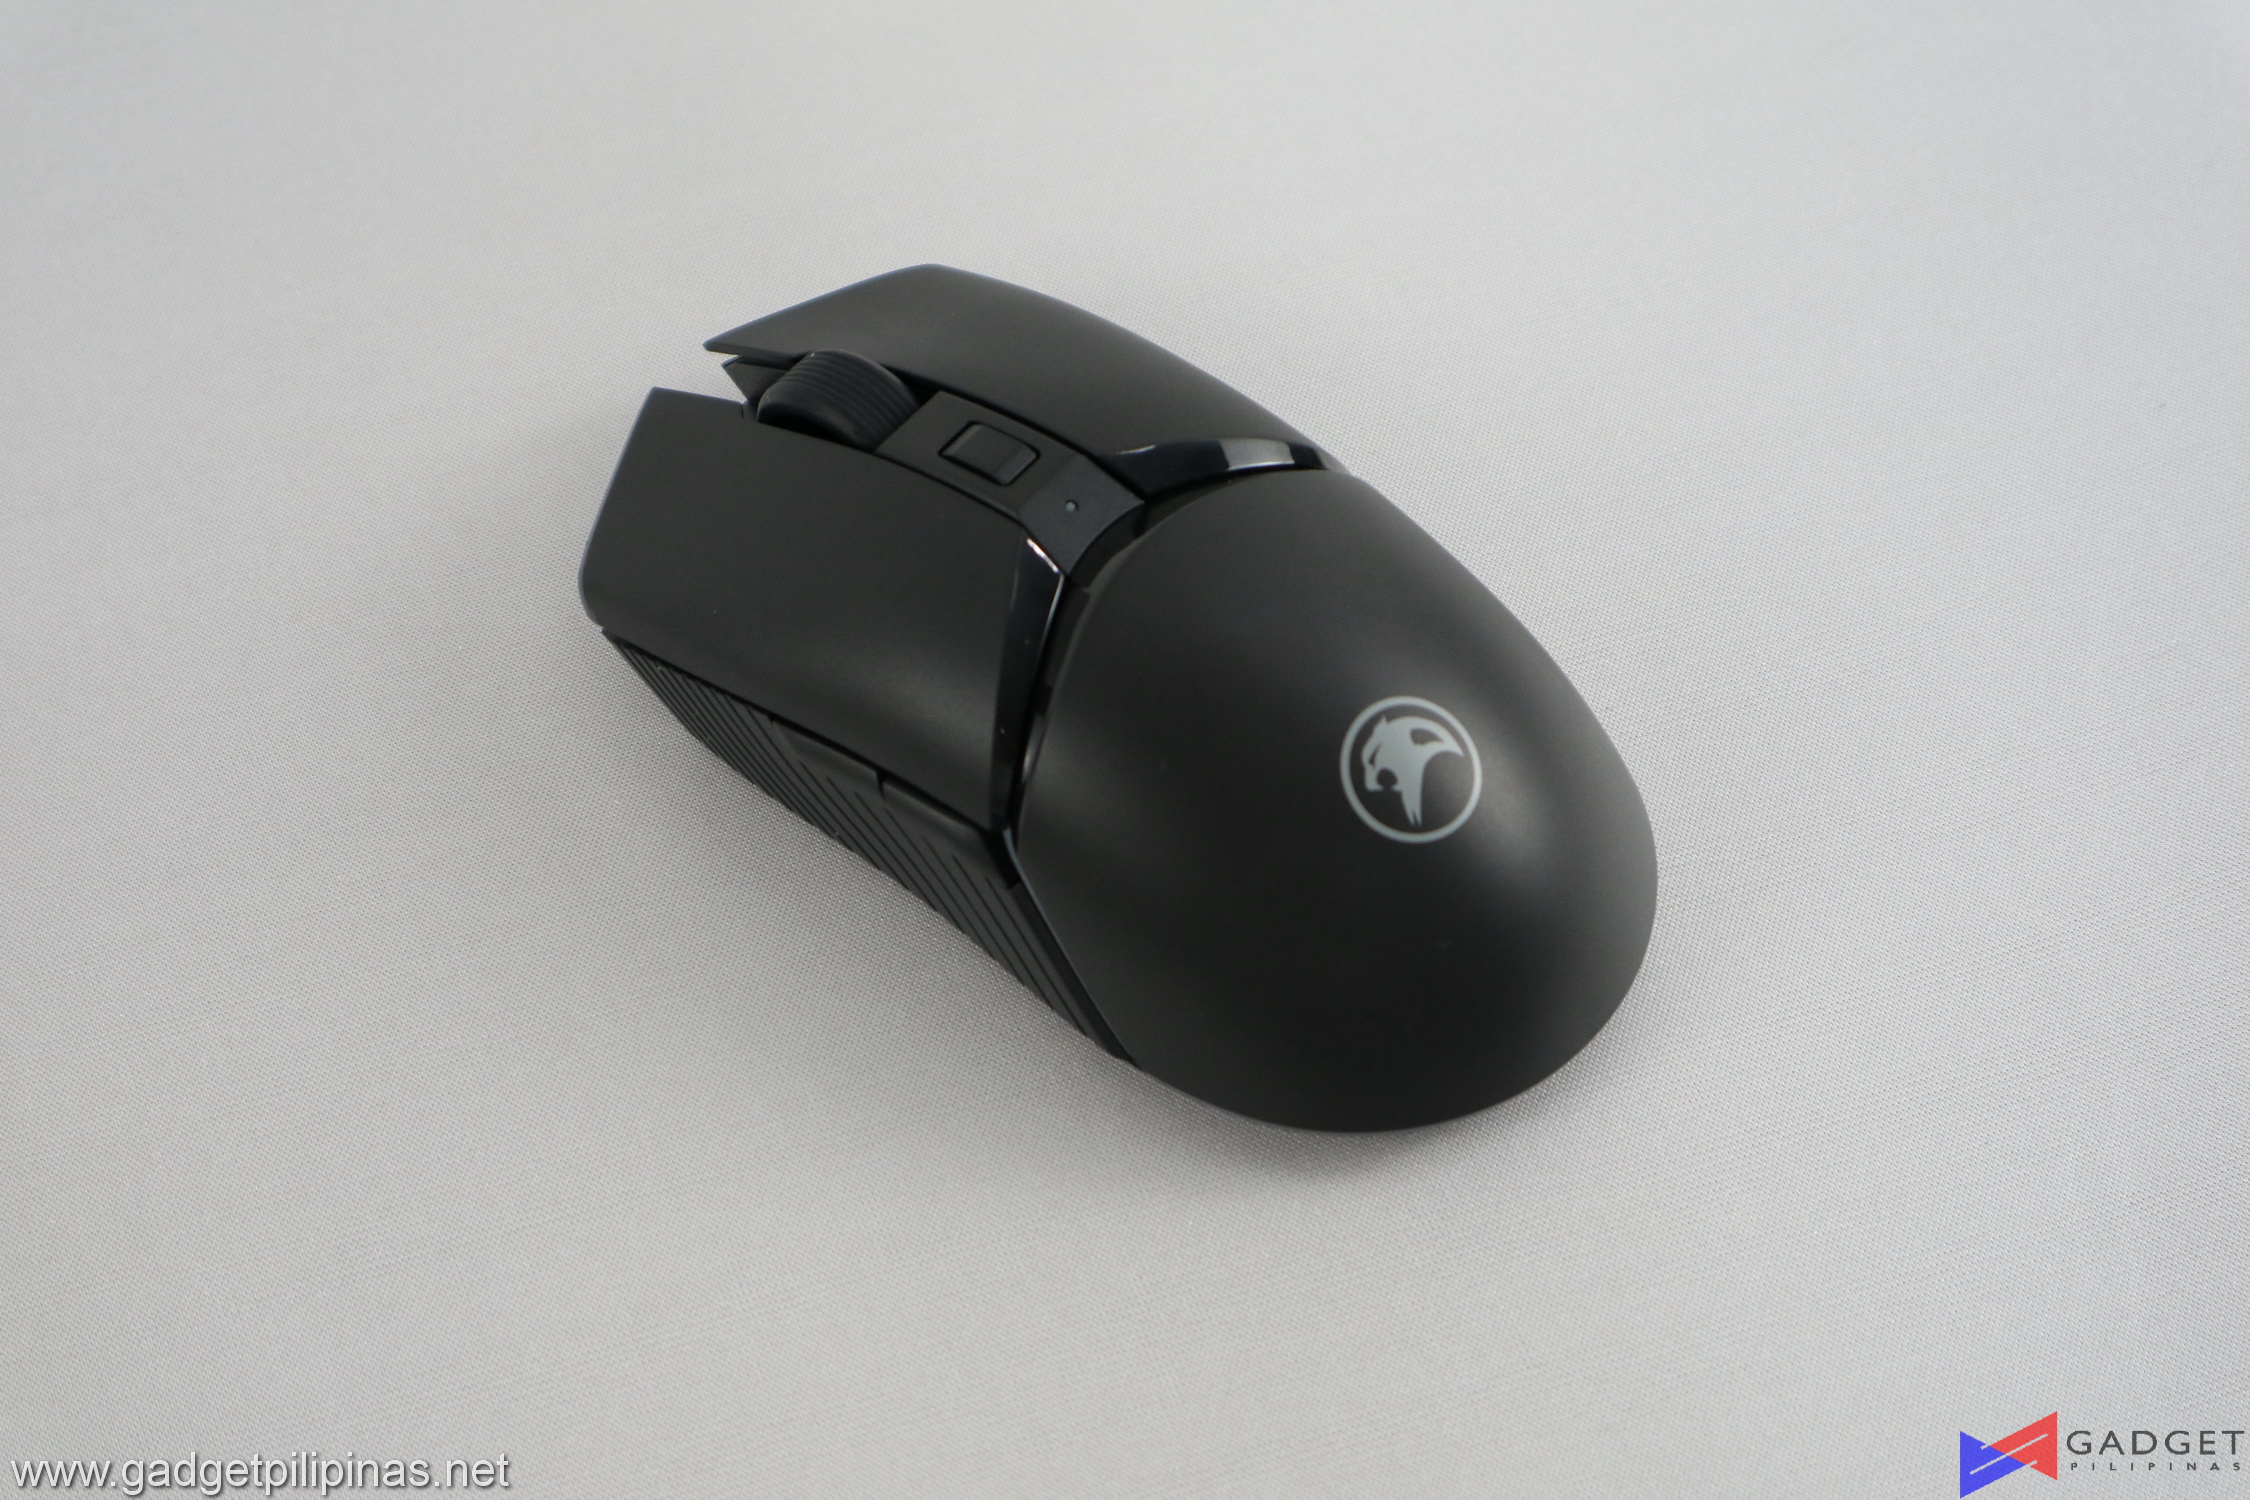 Panther Quasar Prime Wireless Gaming Mouse Review – A Perfect Amalgam of Quality and Price